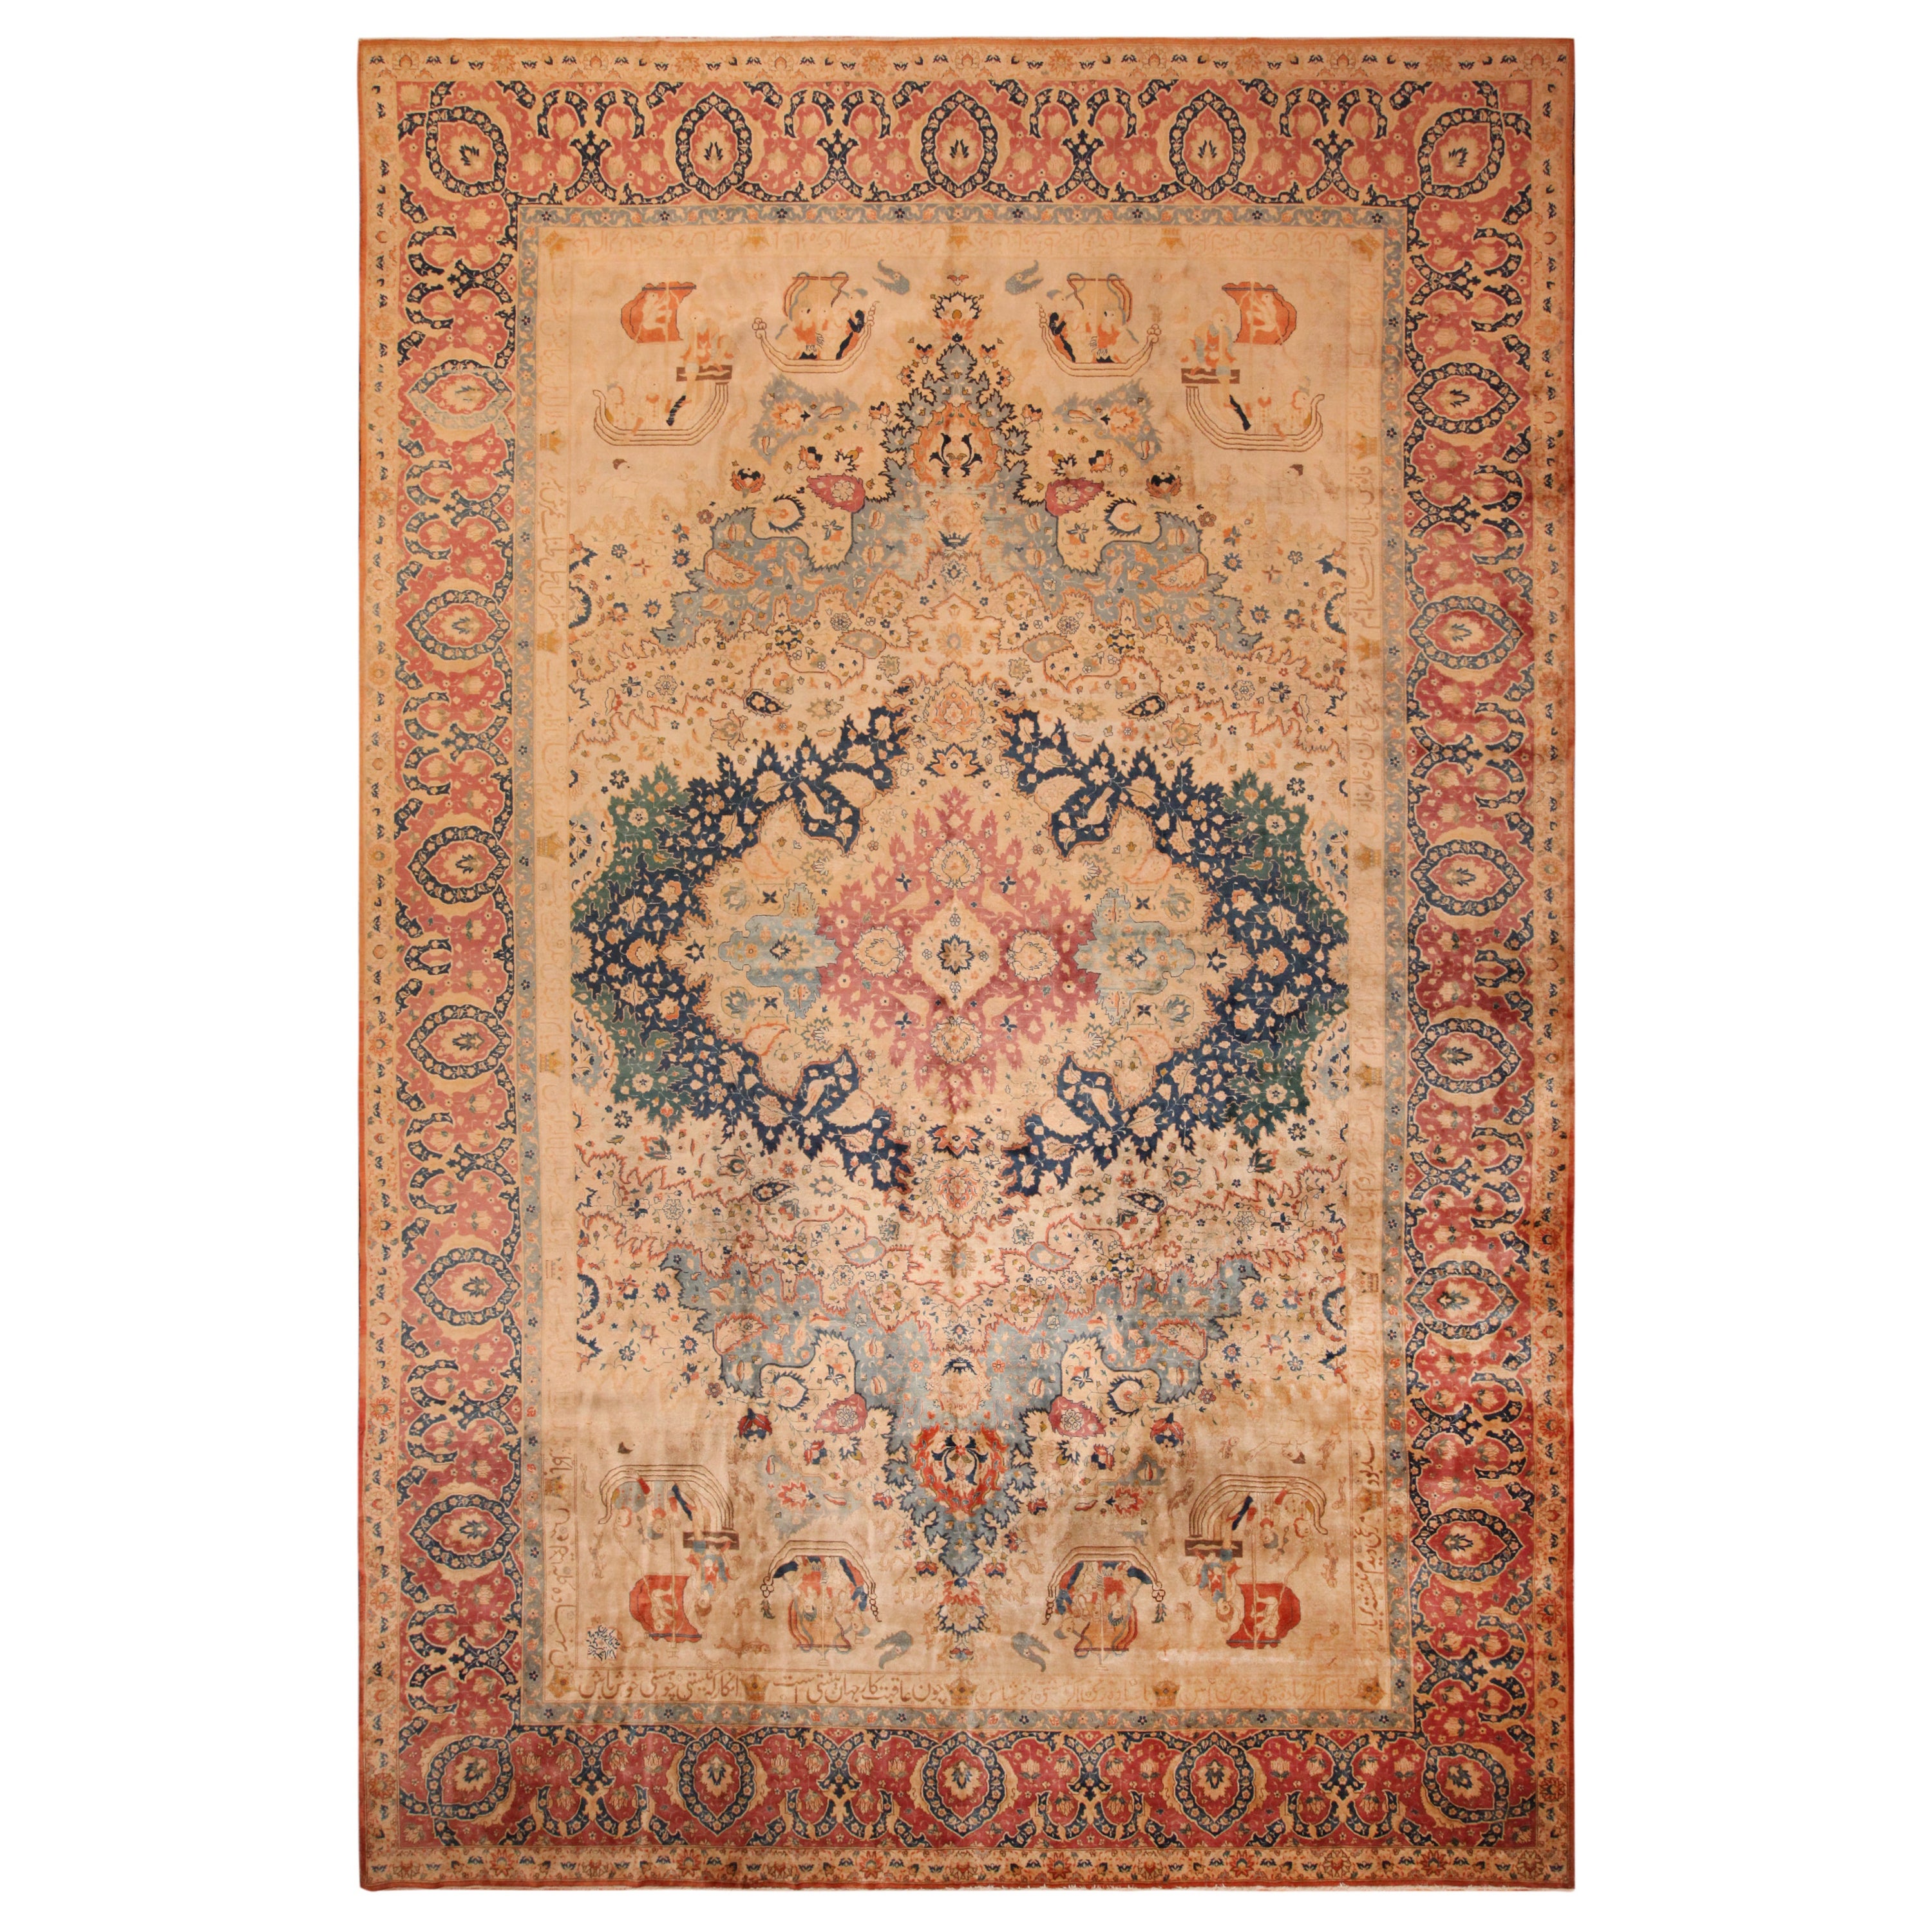 Nazmiyal Collection Antique Persian Tabriz Area Rug. 12 ft 6 in x 18 ft 10 in